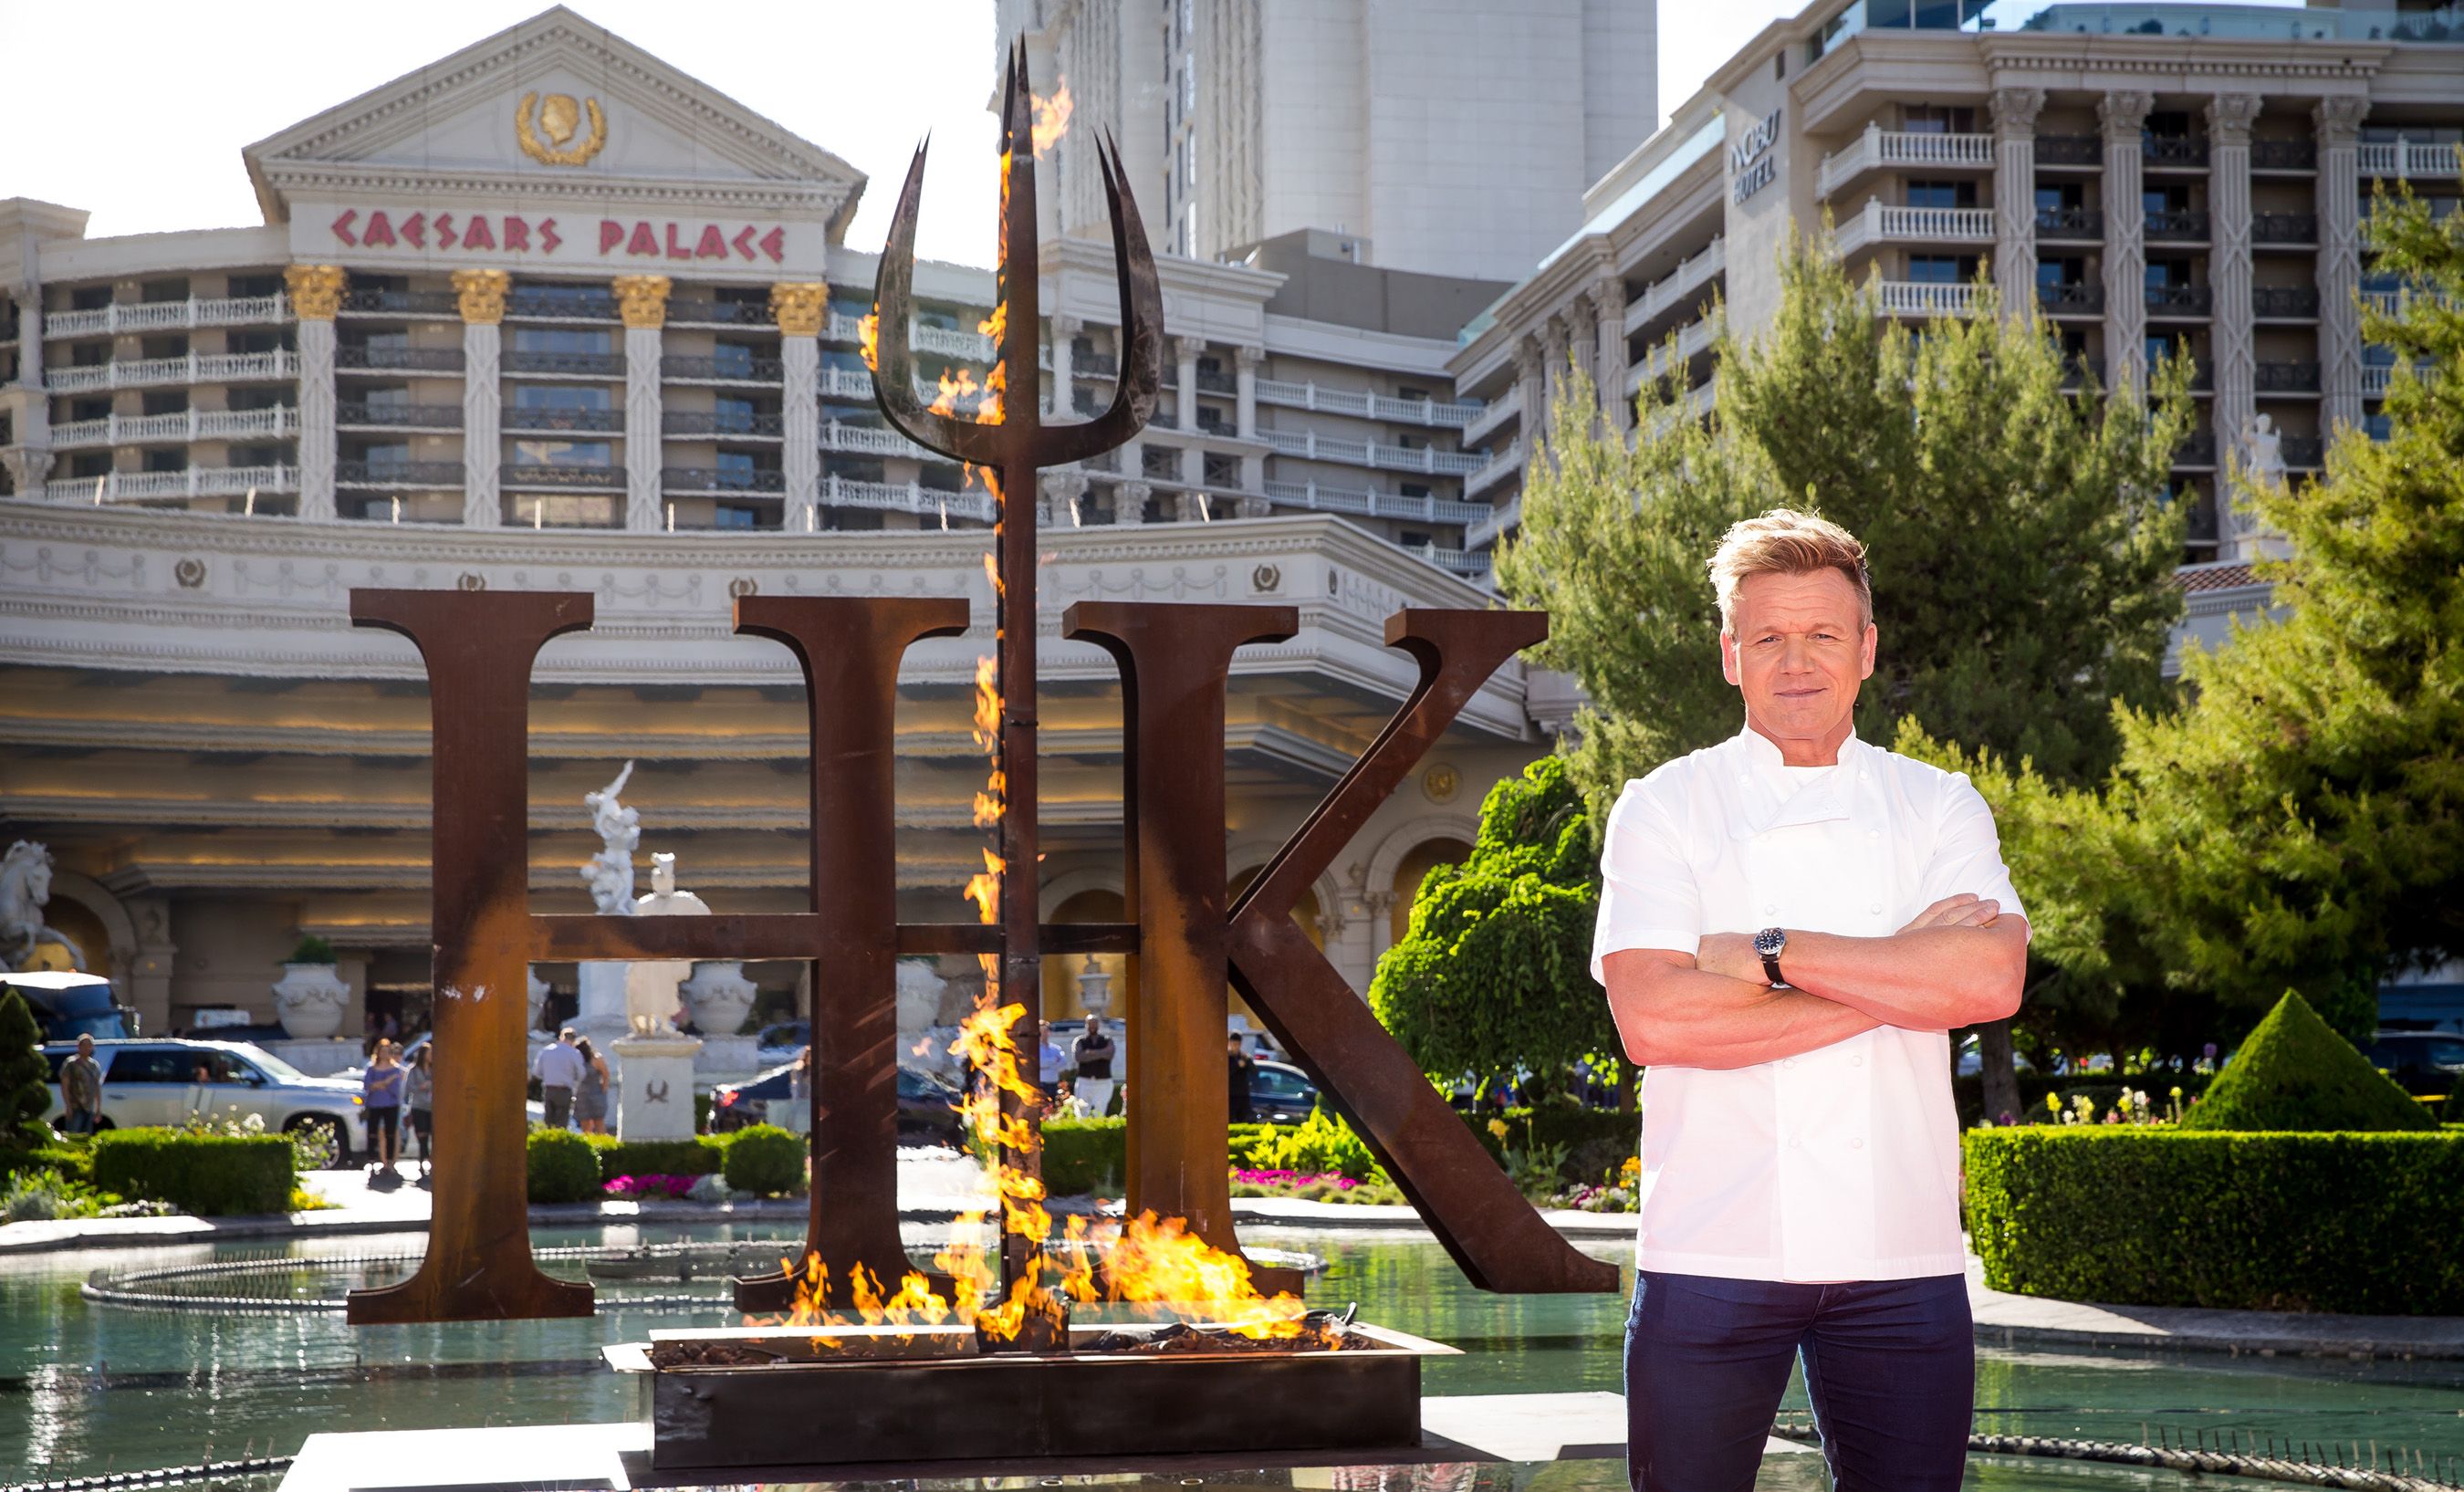 Gordon Ramsay to Open a Hell's Kitchen Restaurant at Caesar's